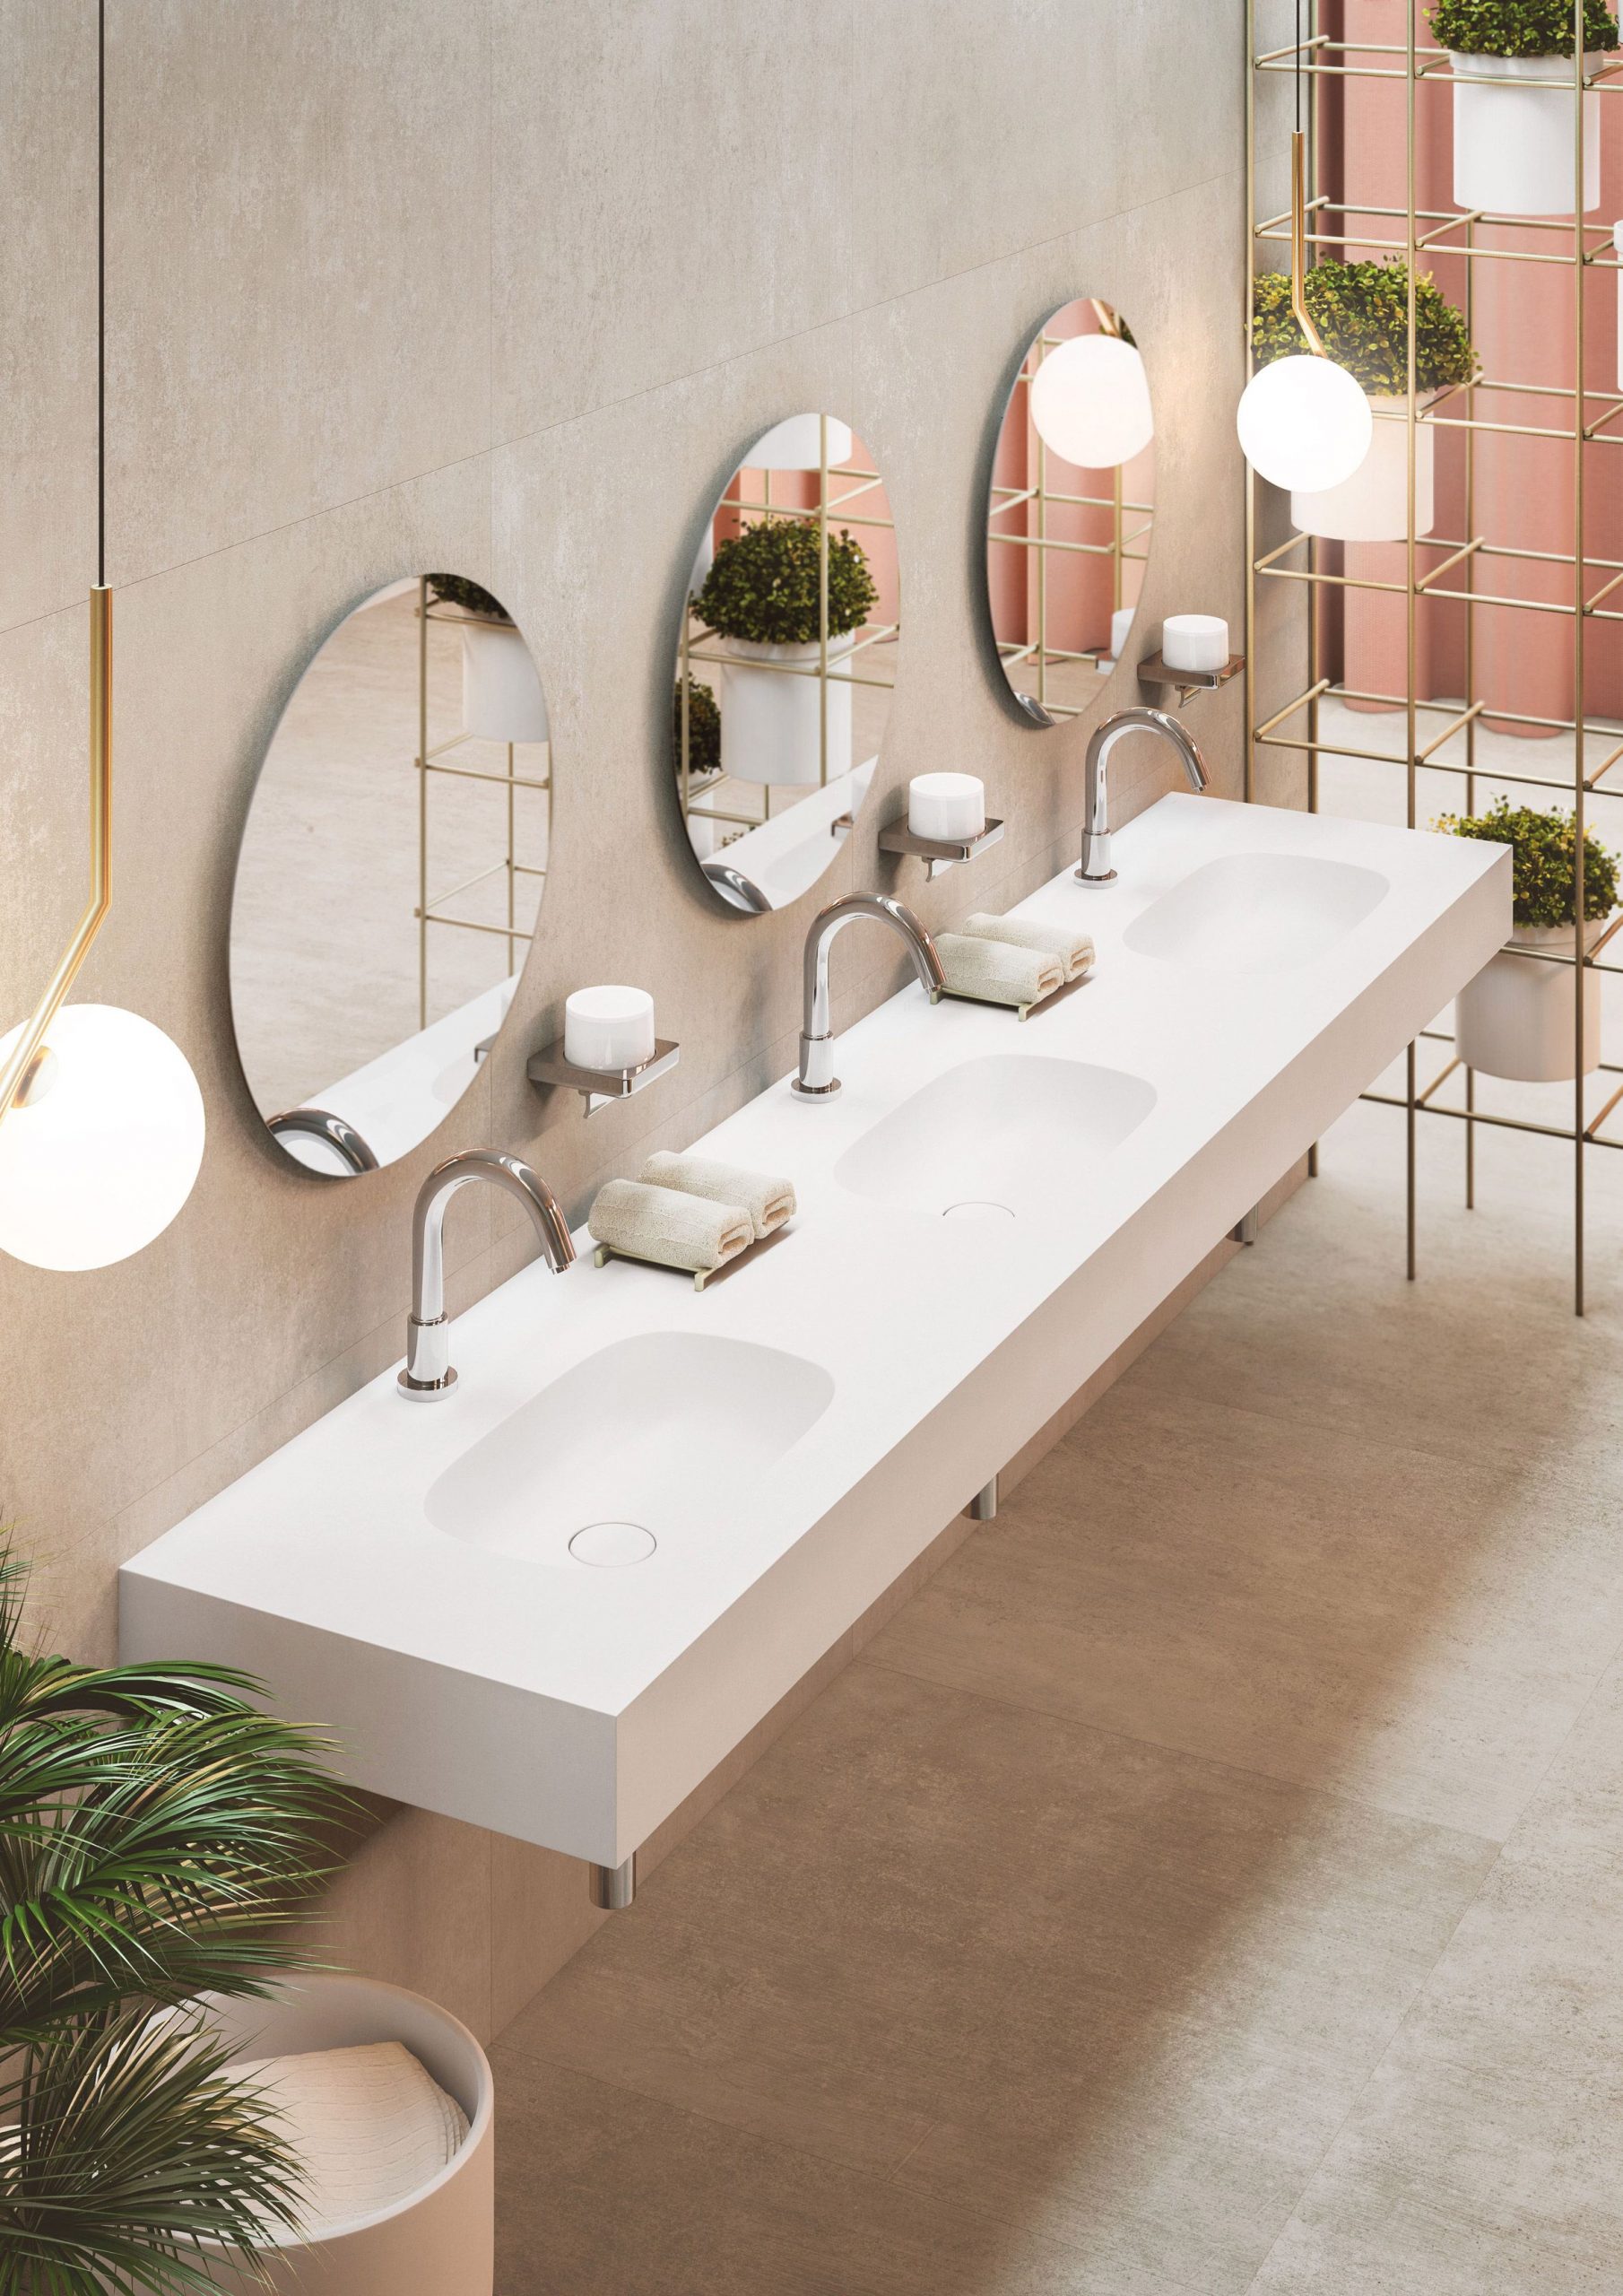 Roca launches the bathroom collection made from the innovative design material Surfex